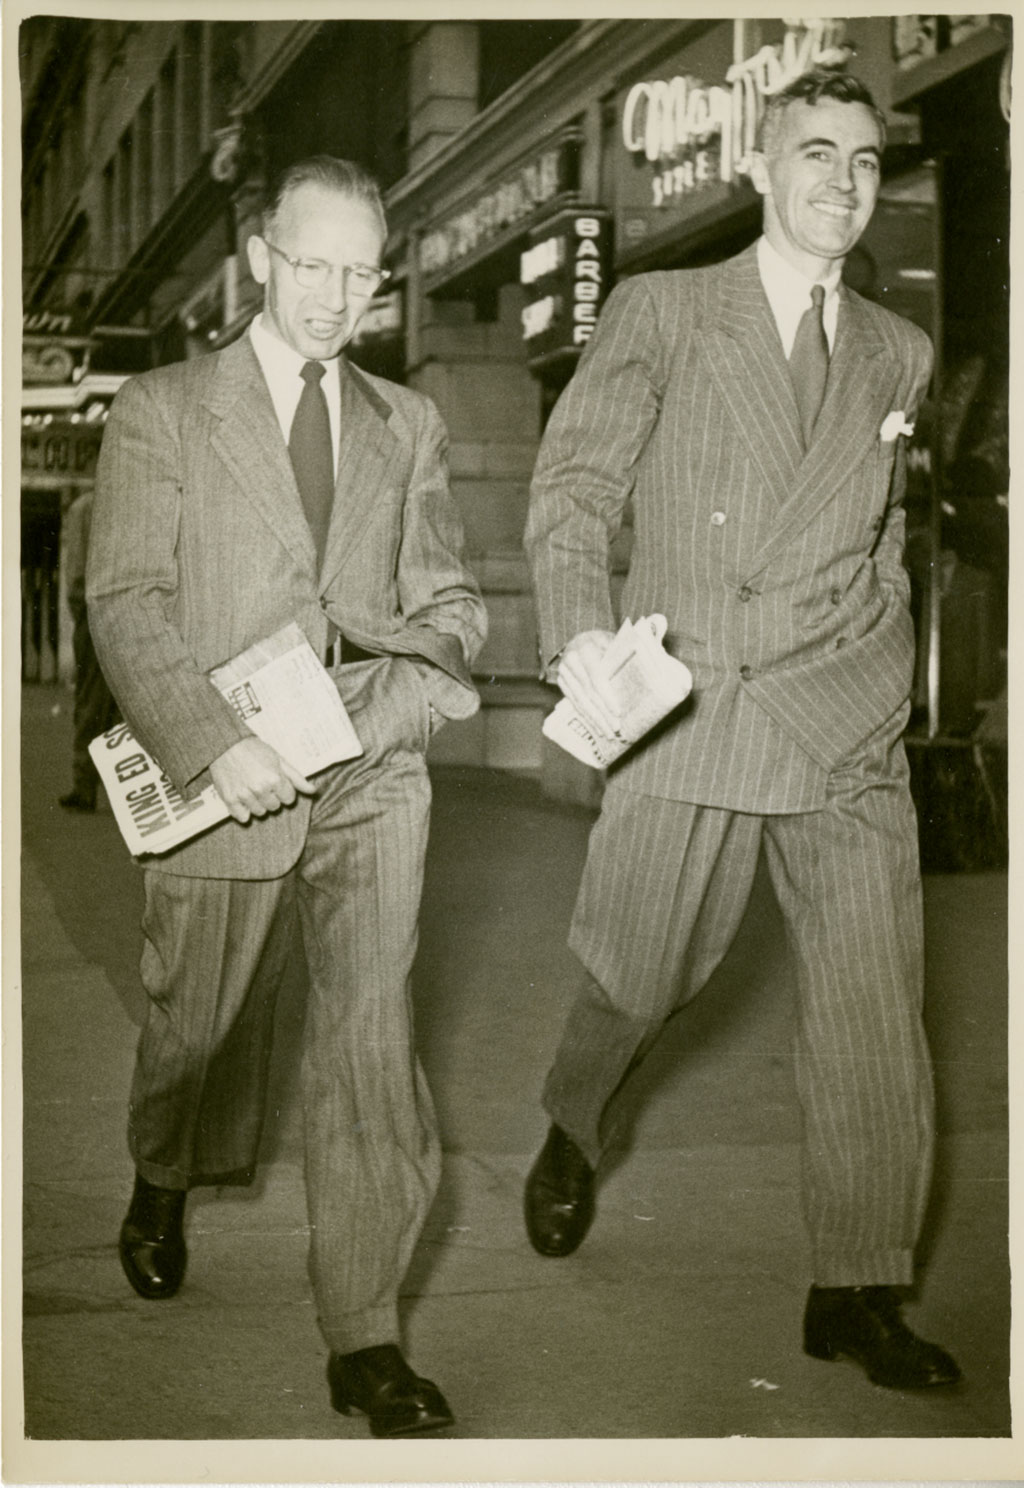 Two men walk with purpose, both holding newspapers in one hand and have the other hand in their pockets.